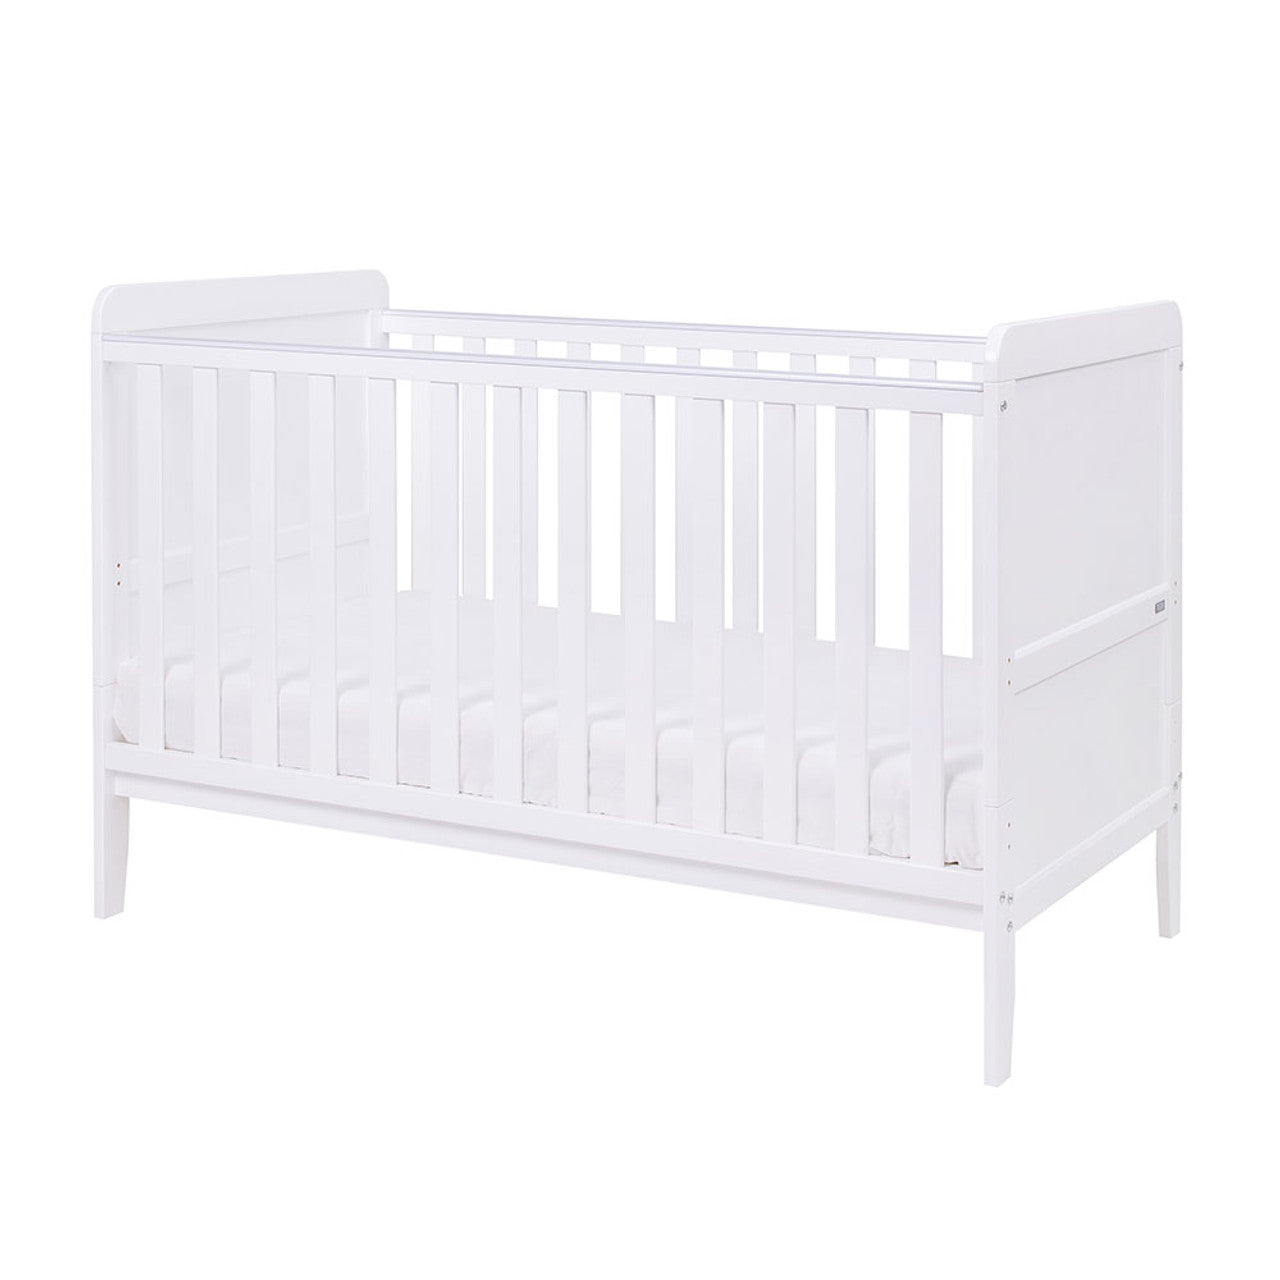 Tutti Bambini Rio 2 Piece Room Set - White - For Your Little One